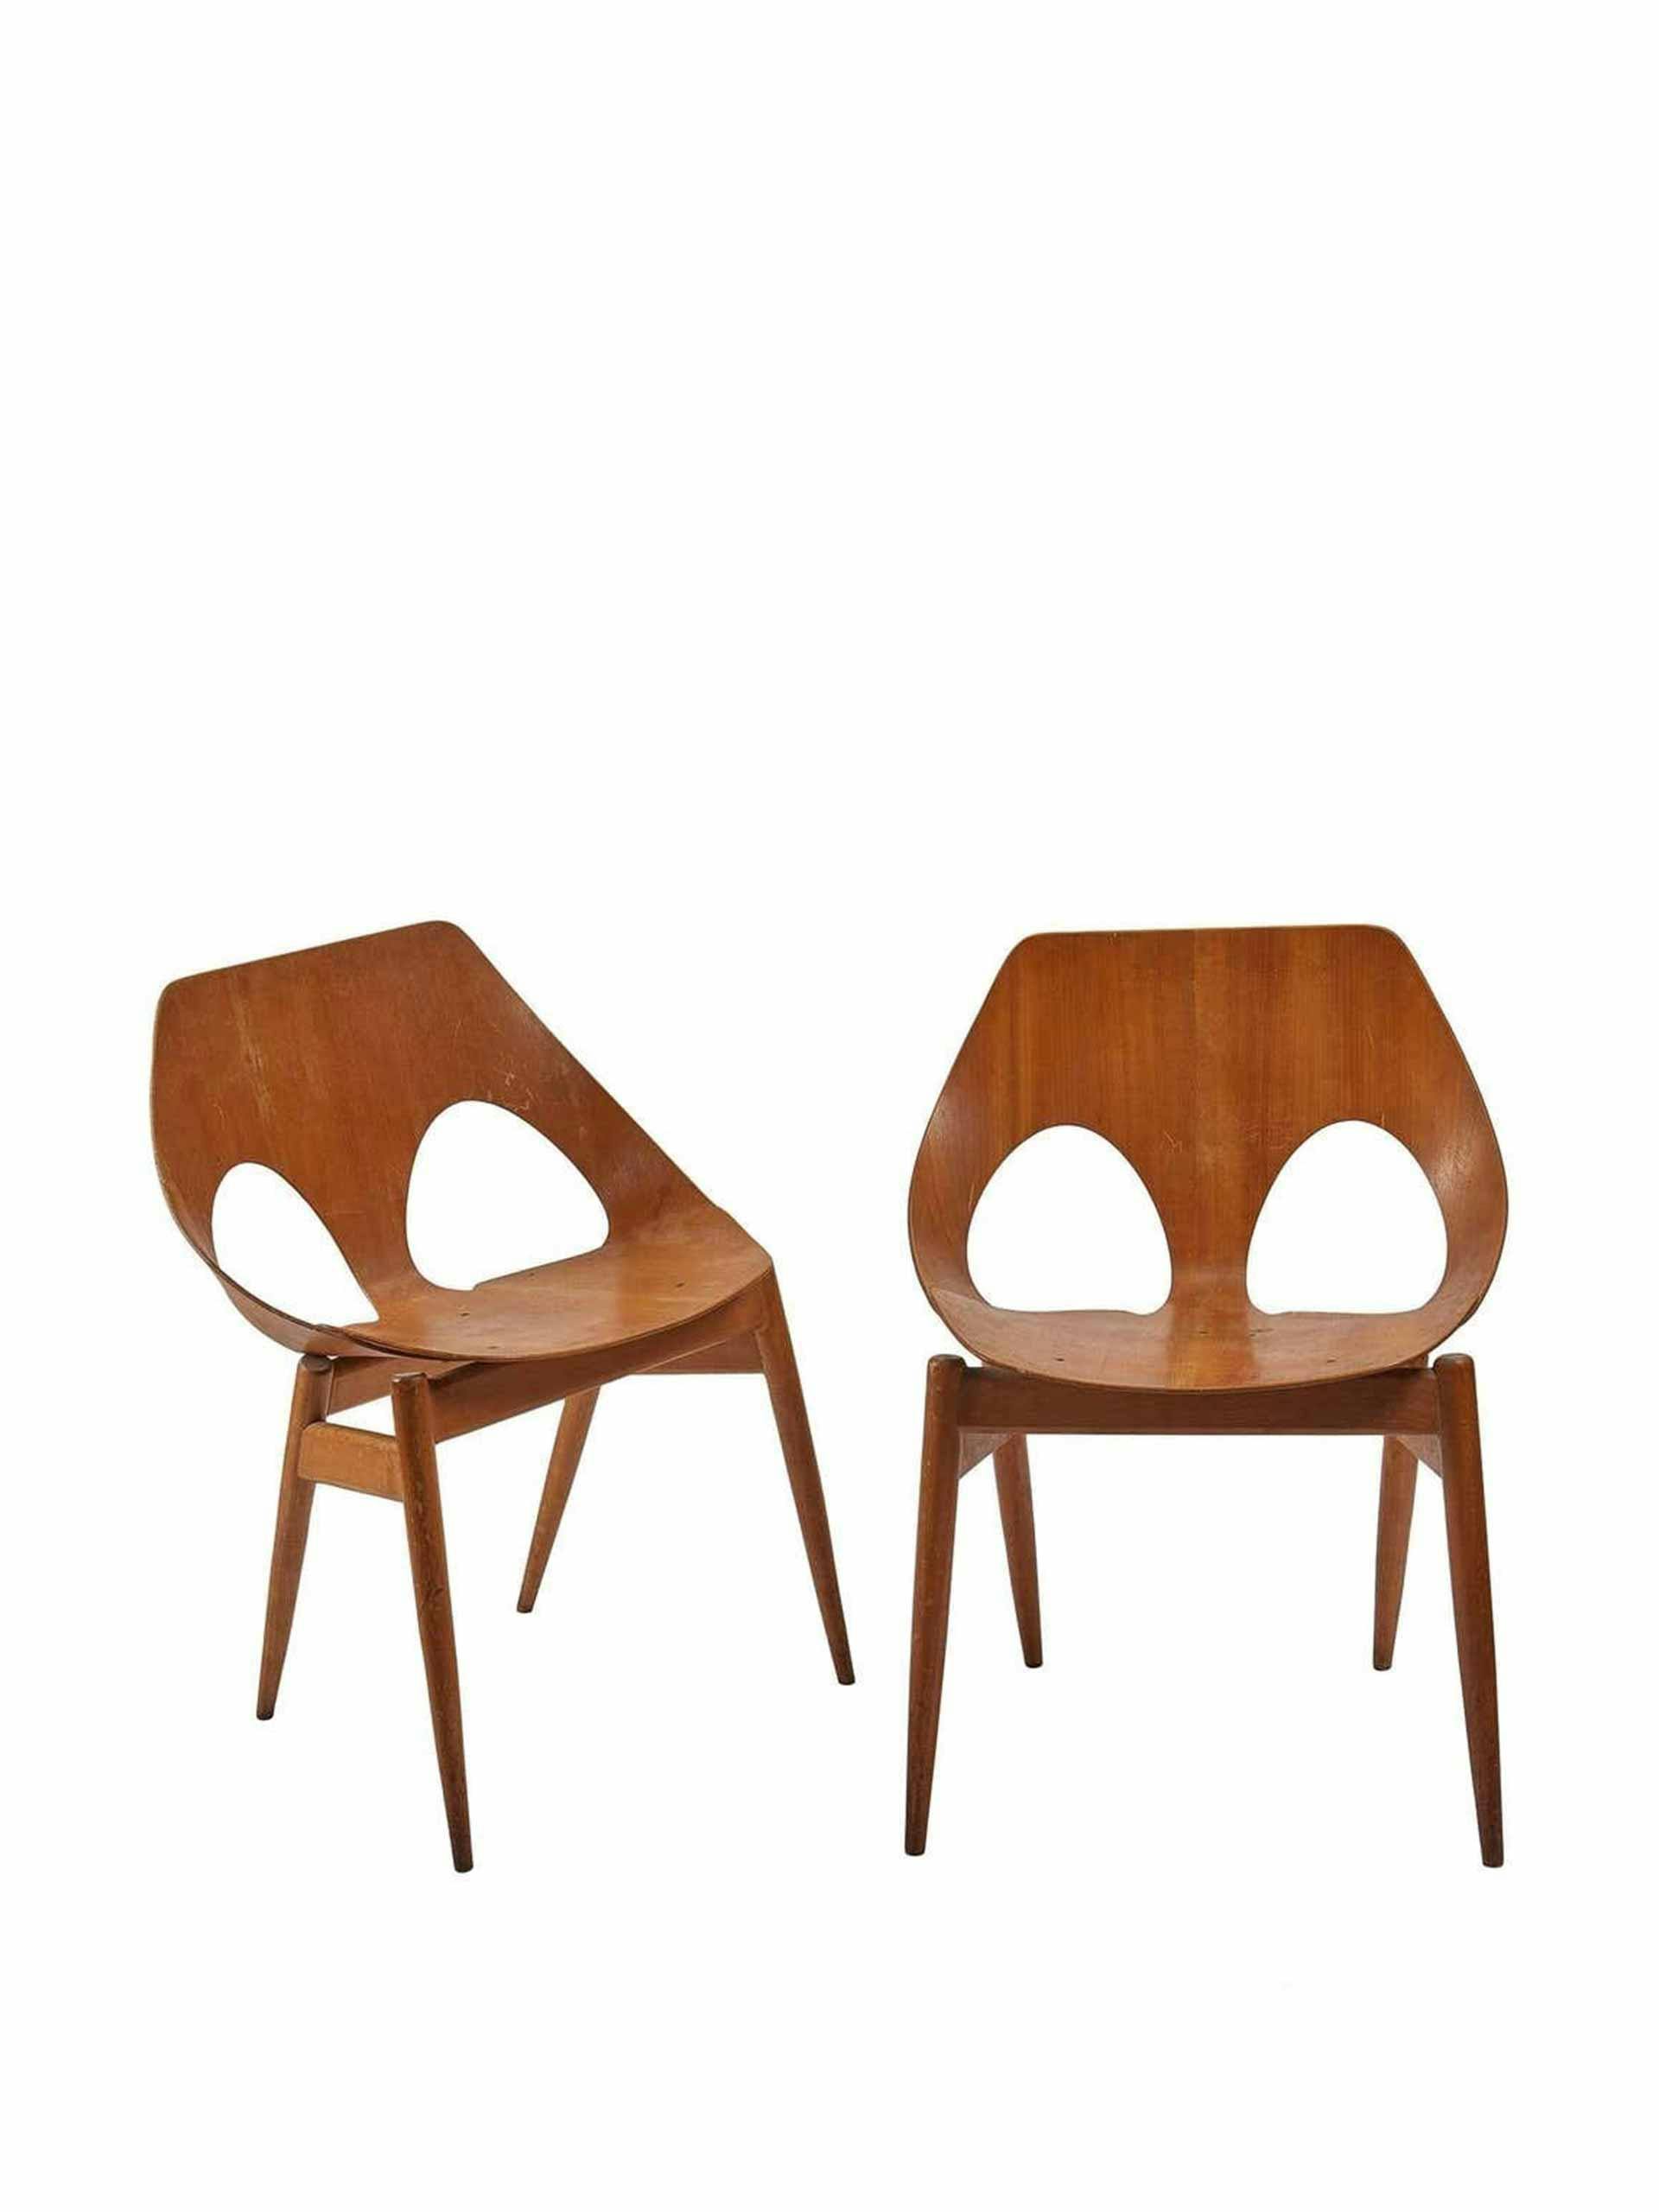 Pair of stacking chairs